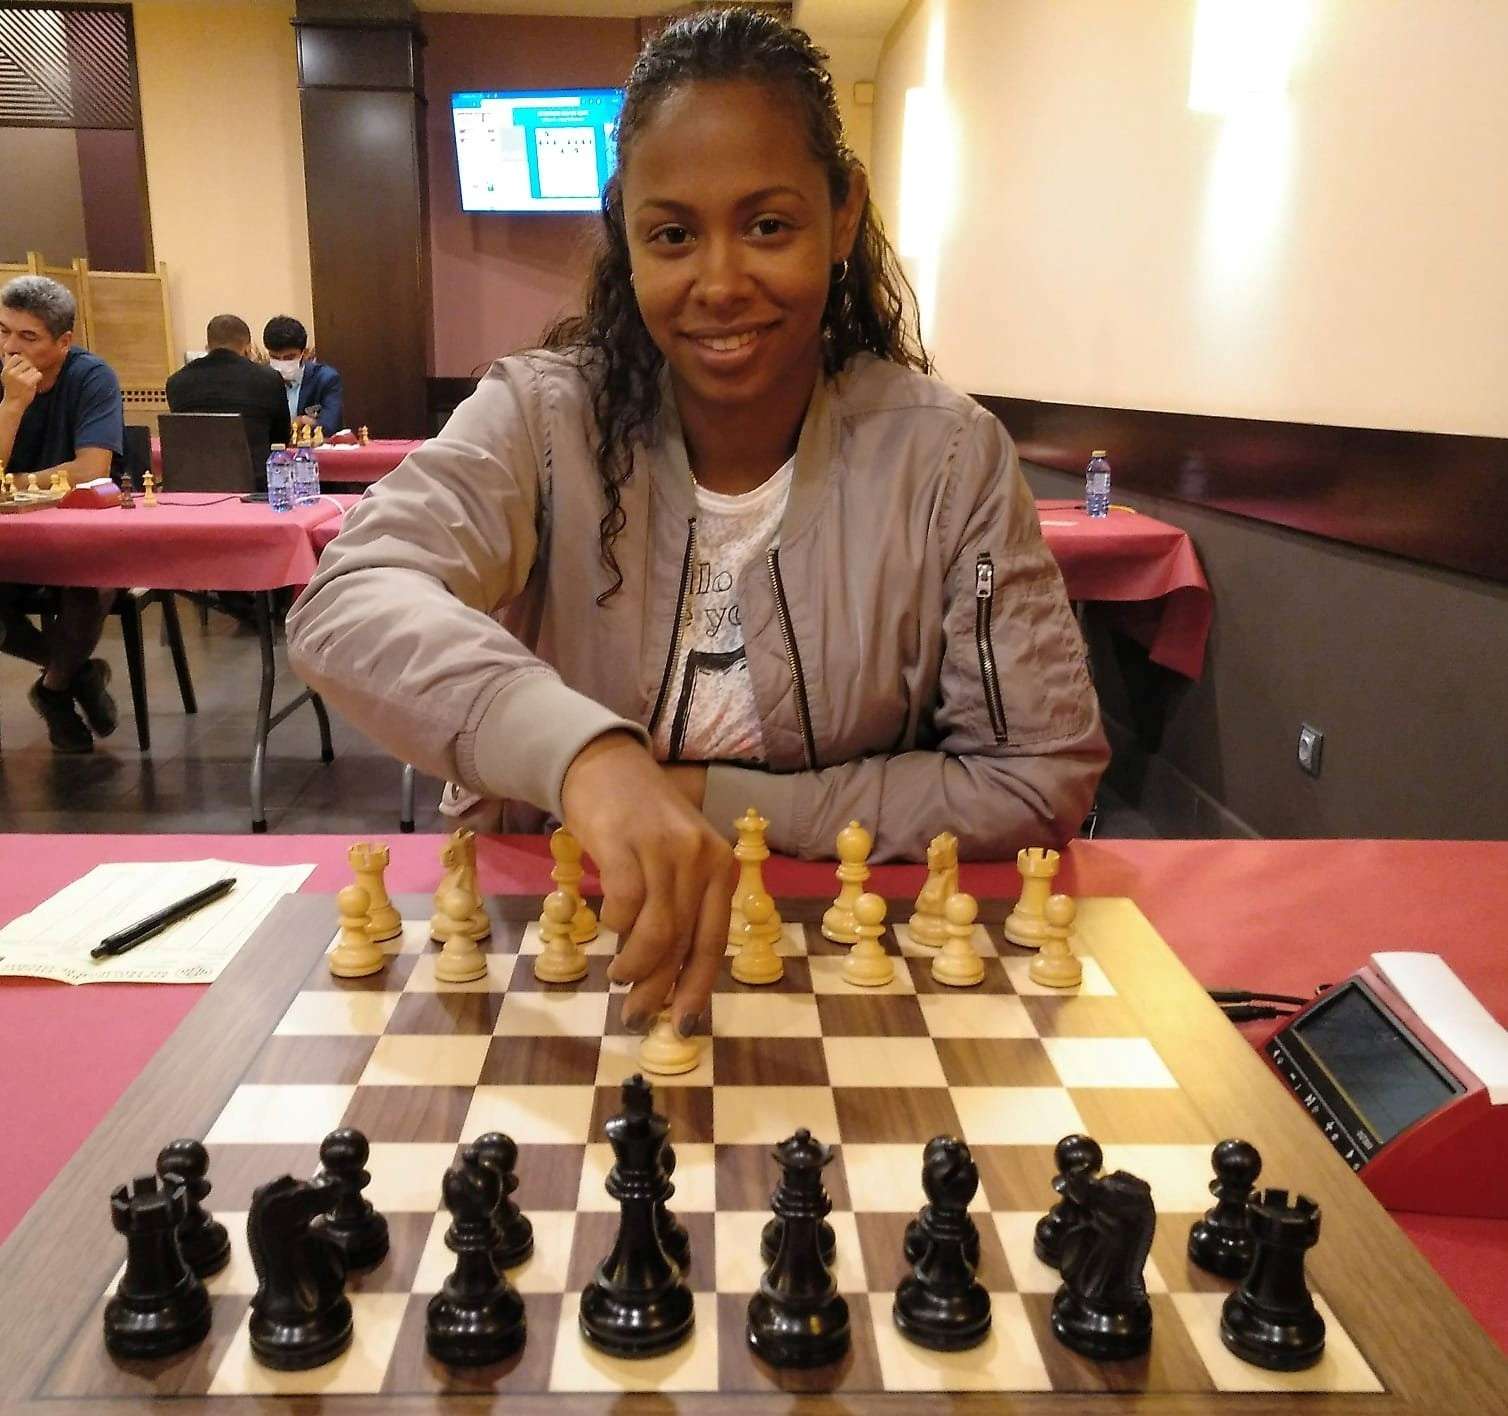 Cuba tied in the third round of the World Chess Olympiad